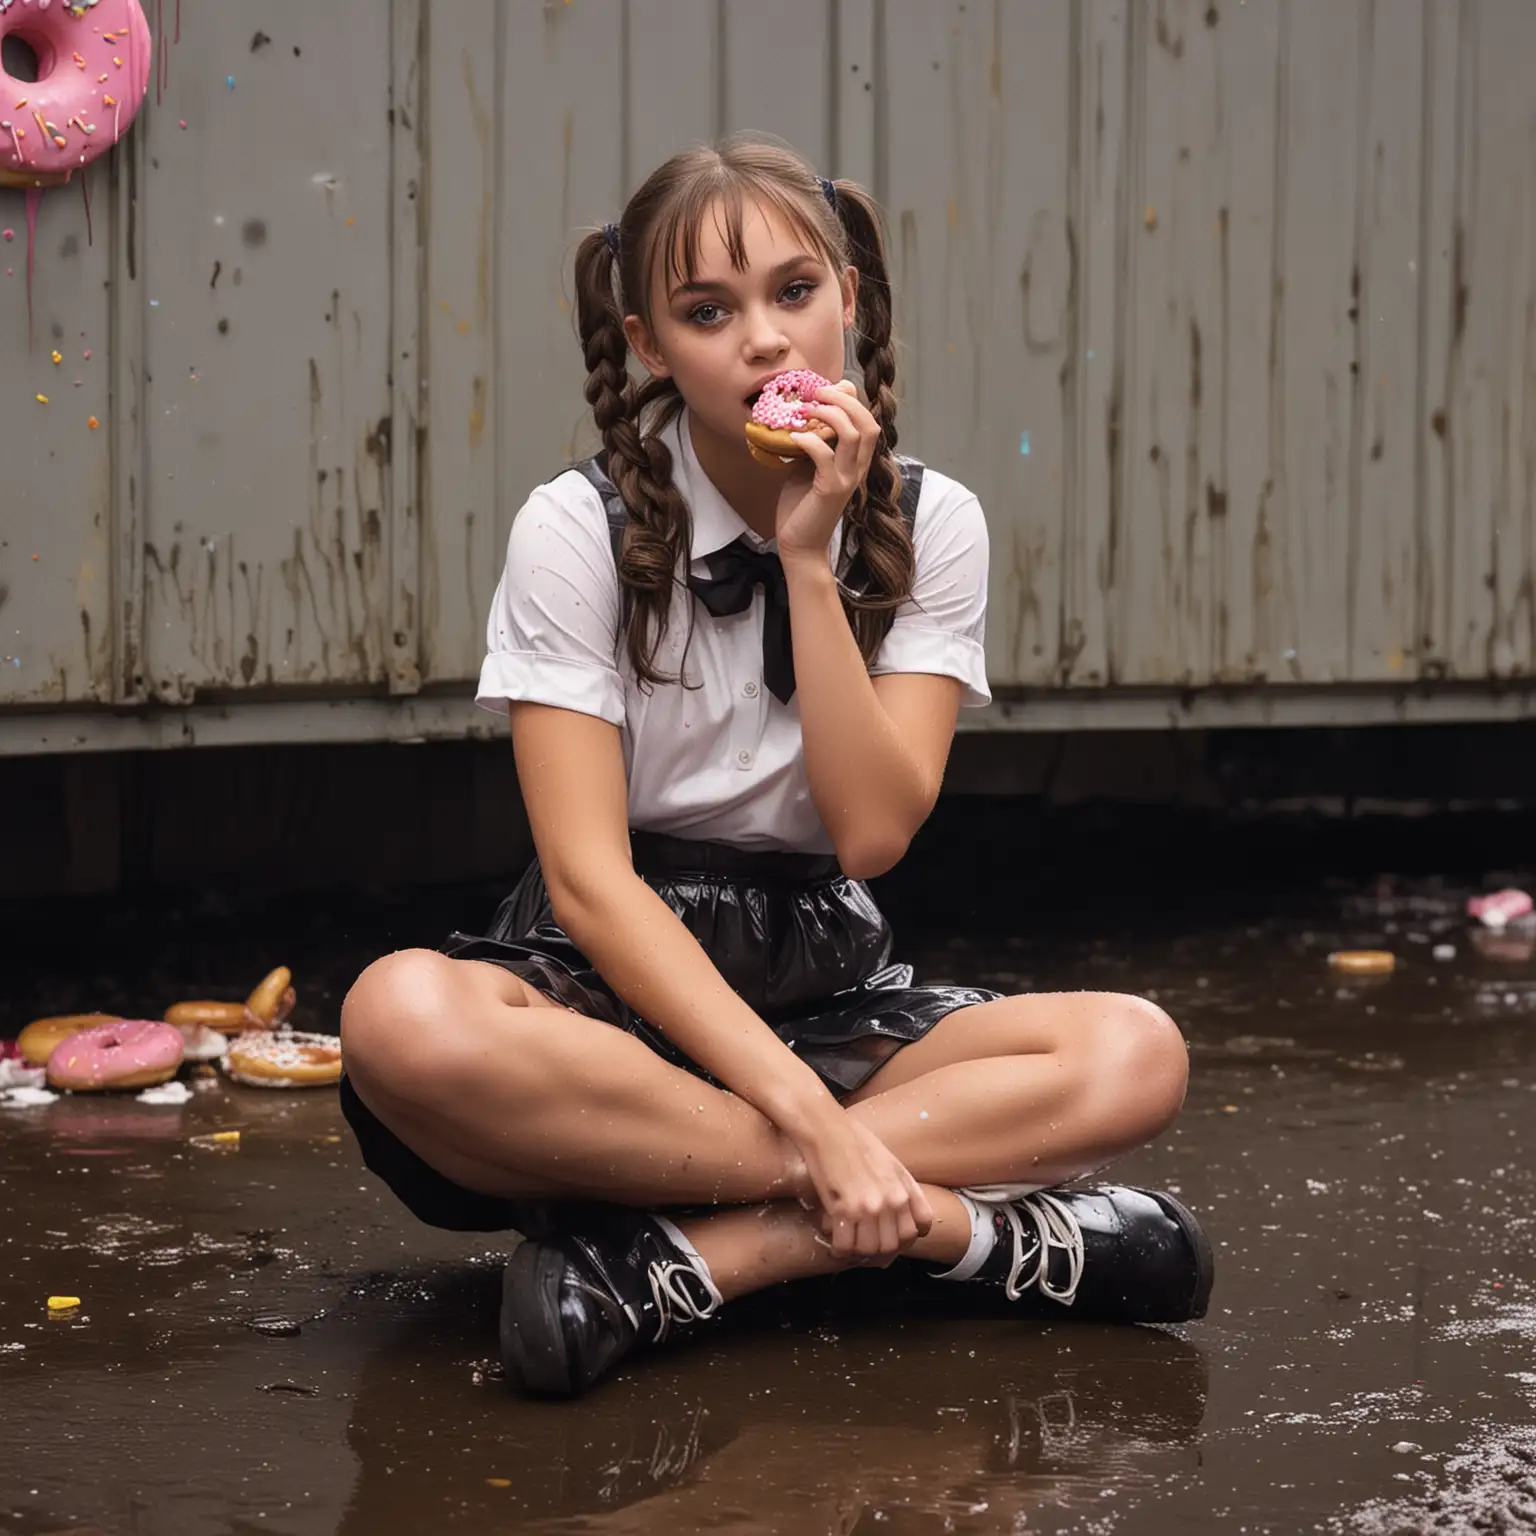 photorealistic, young maddie ziegler, dressed as a schoolgirl, pigtails, on her knees in front a dumpster, neon light, night, muddy, trash, dirty, wet, stained, grim, graffitti, eating a donught
